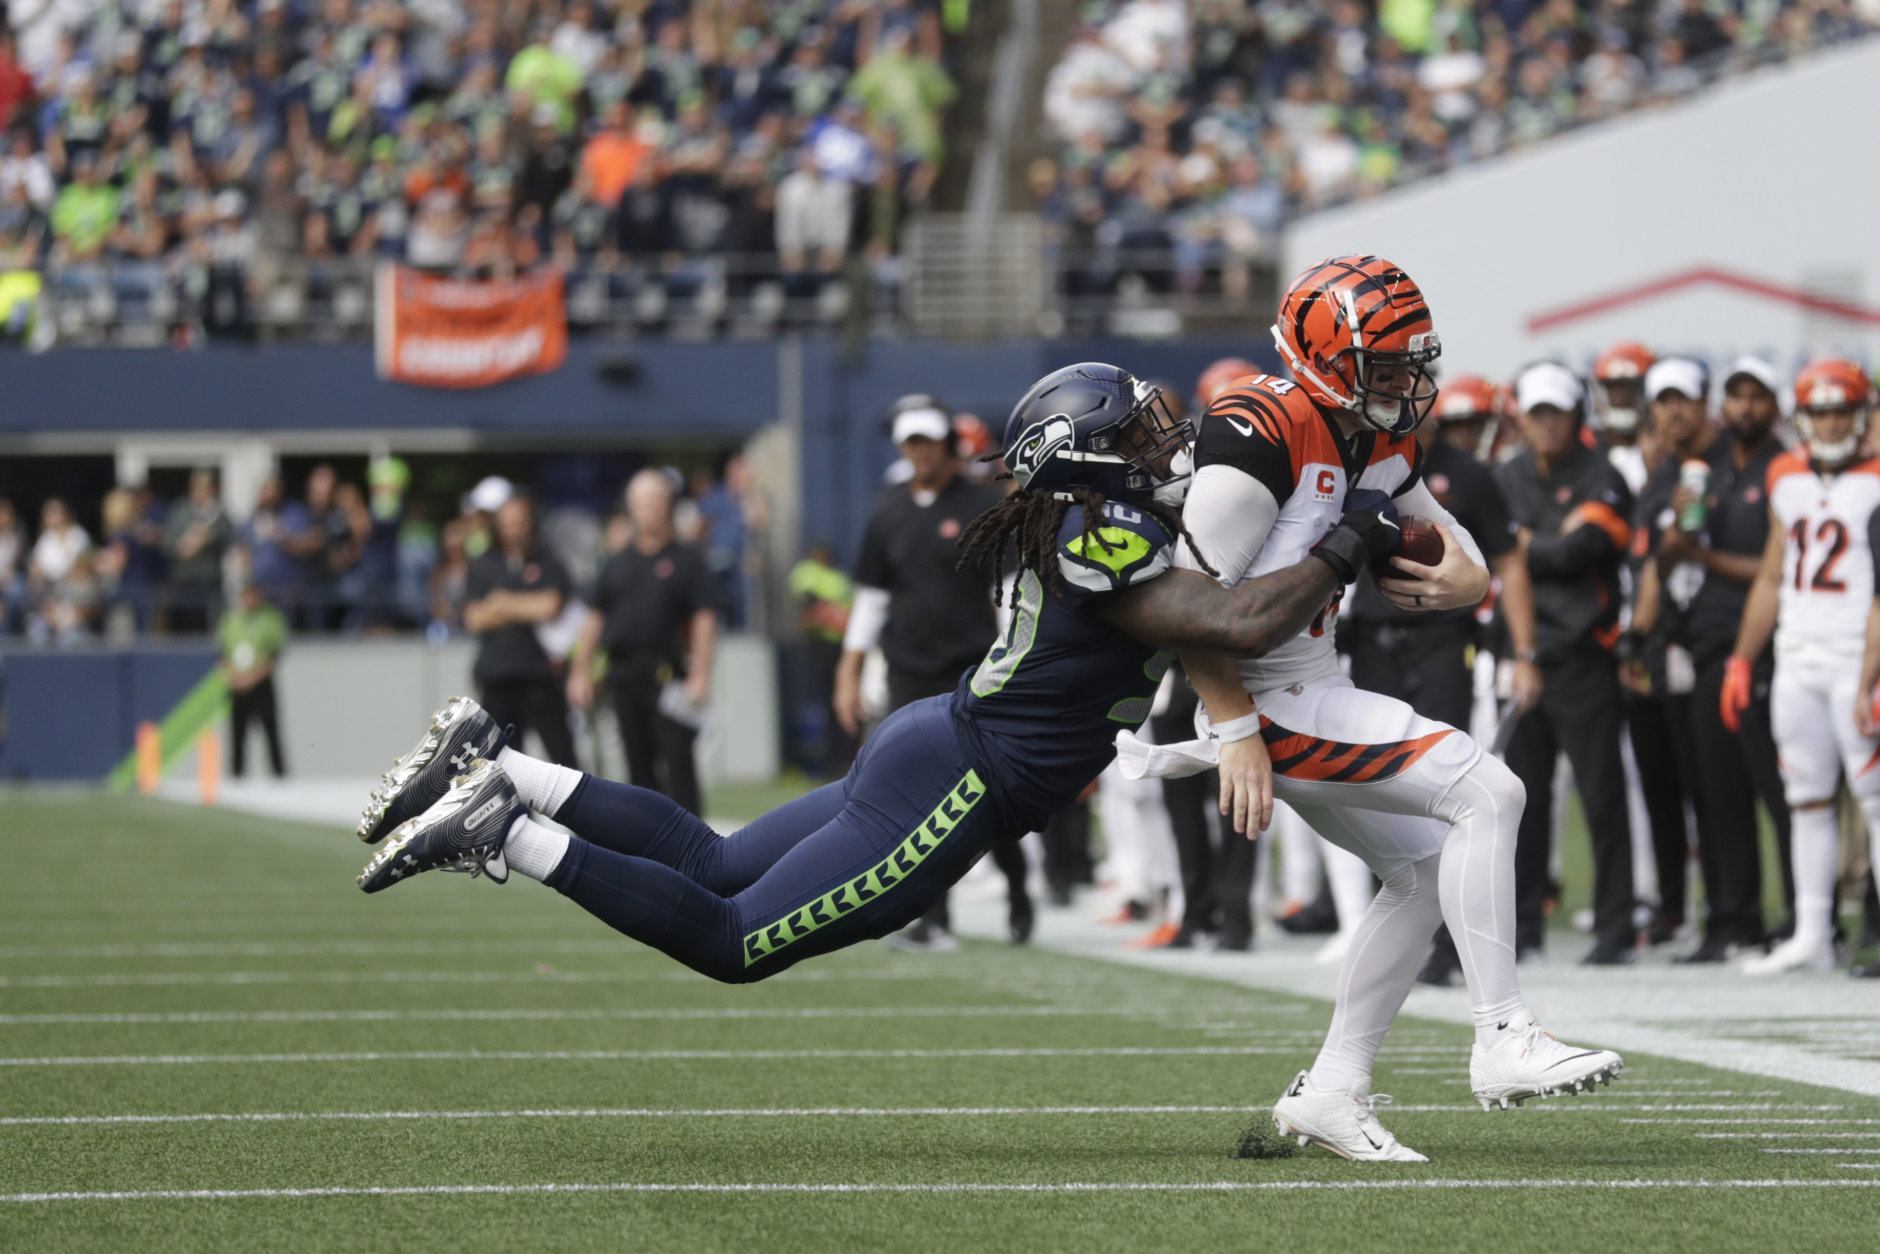 <p><b><i>Bengals 20</i></b><br />
<b><i>Seahawks 21</i></b></p>
<p>Even if getting the most out of John Ross is the only thing Zac Taylor does in Cincinnati, the Bengals will be a fun team to watch, but definitely still bound to lose more games than they win.</p>
<p>And even if opening things up for his new teammates is all Jadeveon Clowney does in Seattle, the Seahawks will be a fun team to watch — bound to win more games than they lose.</p>
